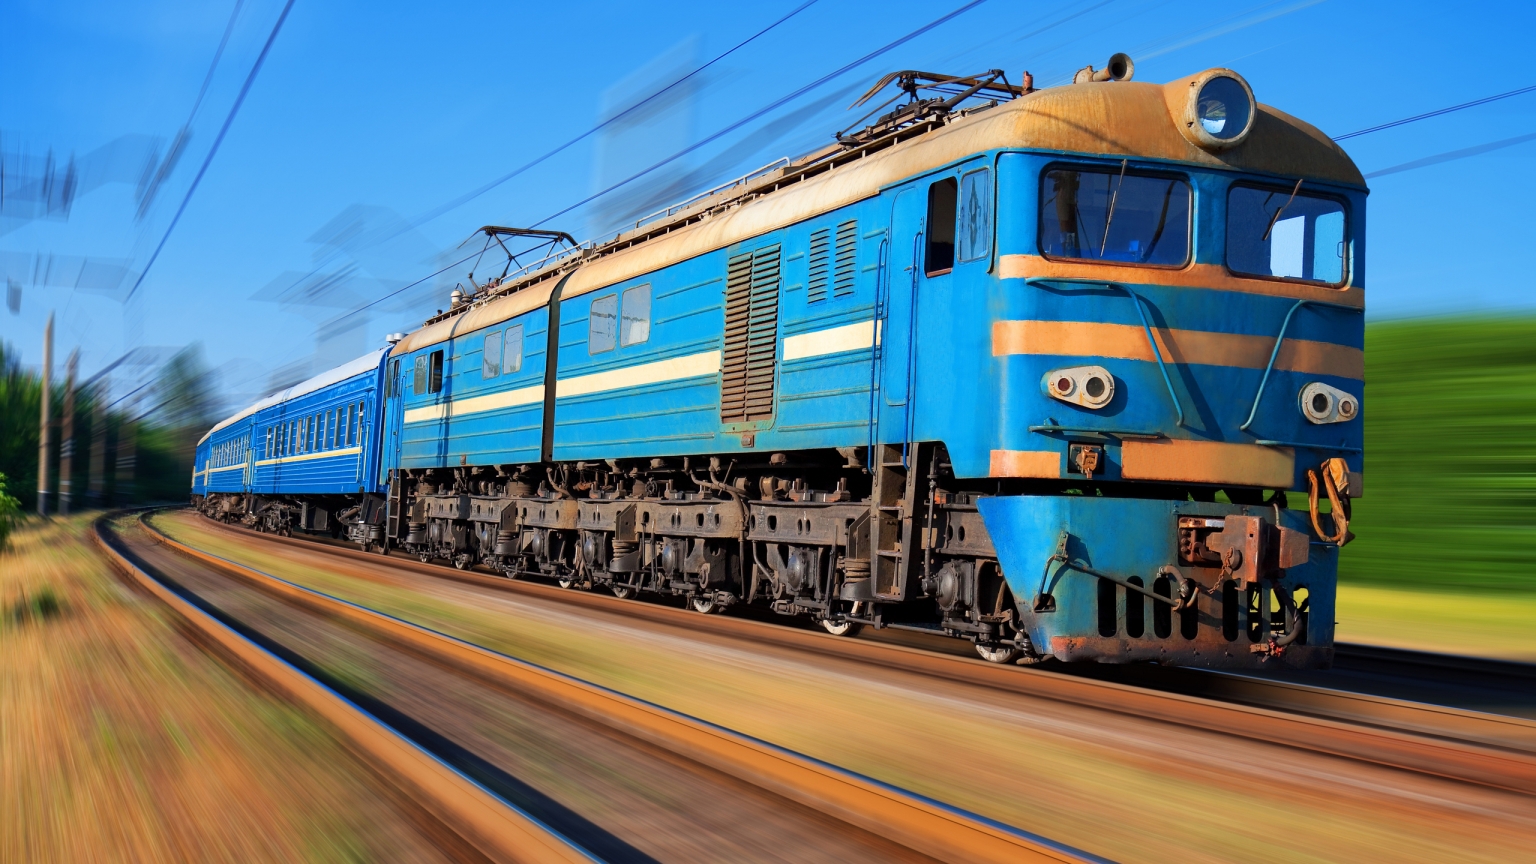 Old Blue Train for 1536 x 864 HDTV resolution